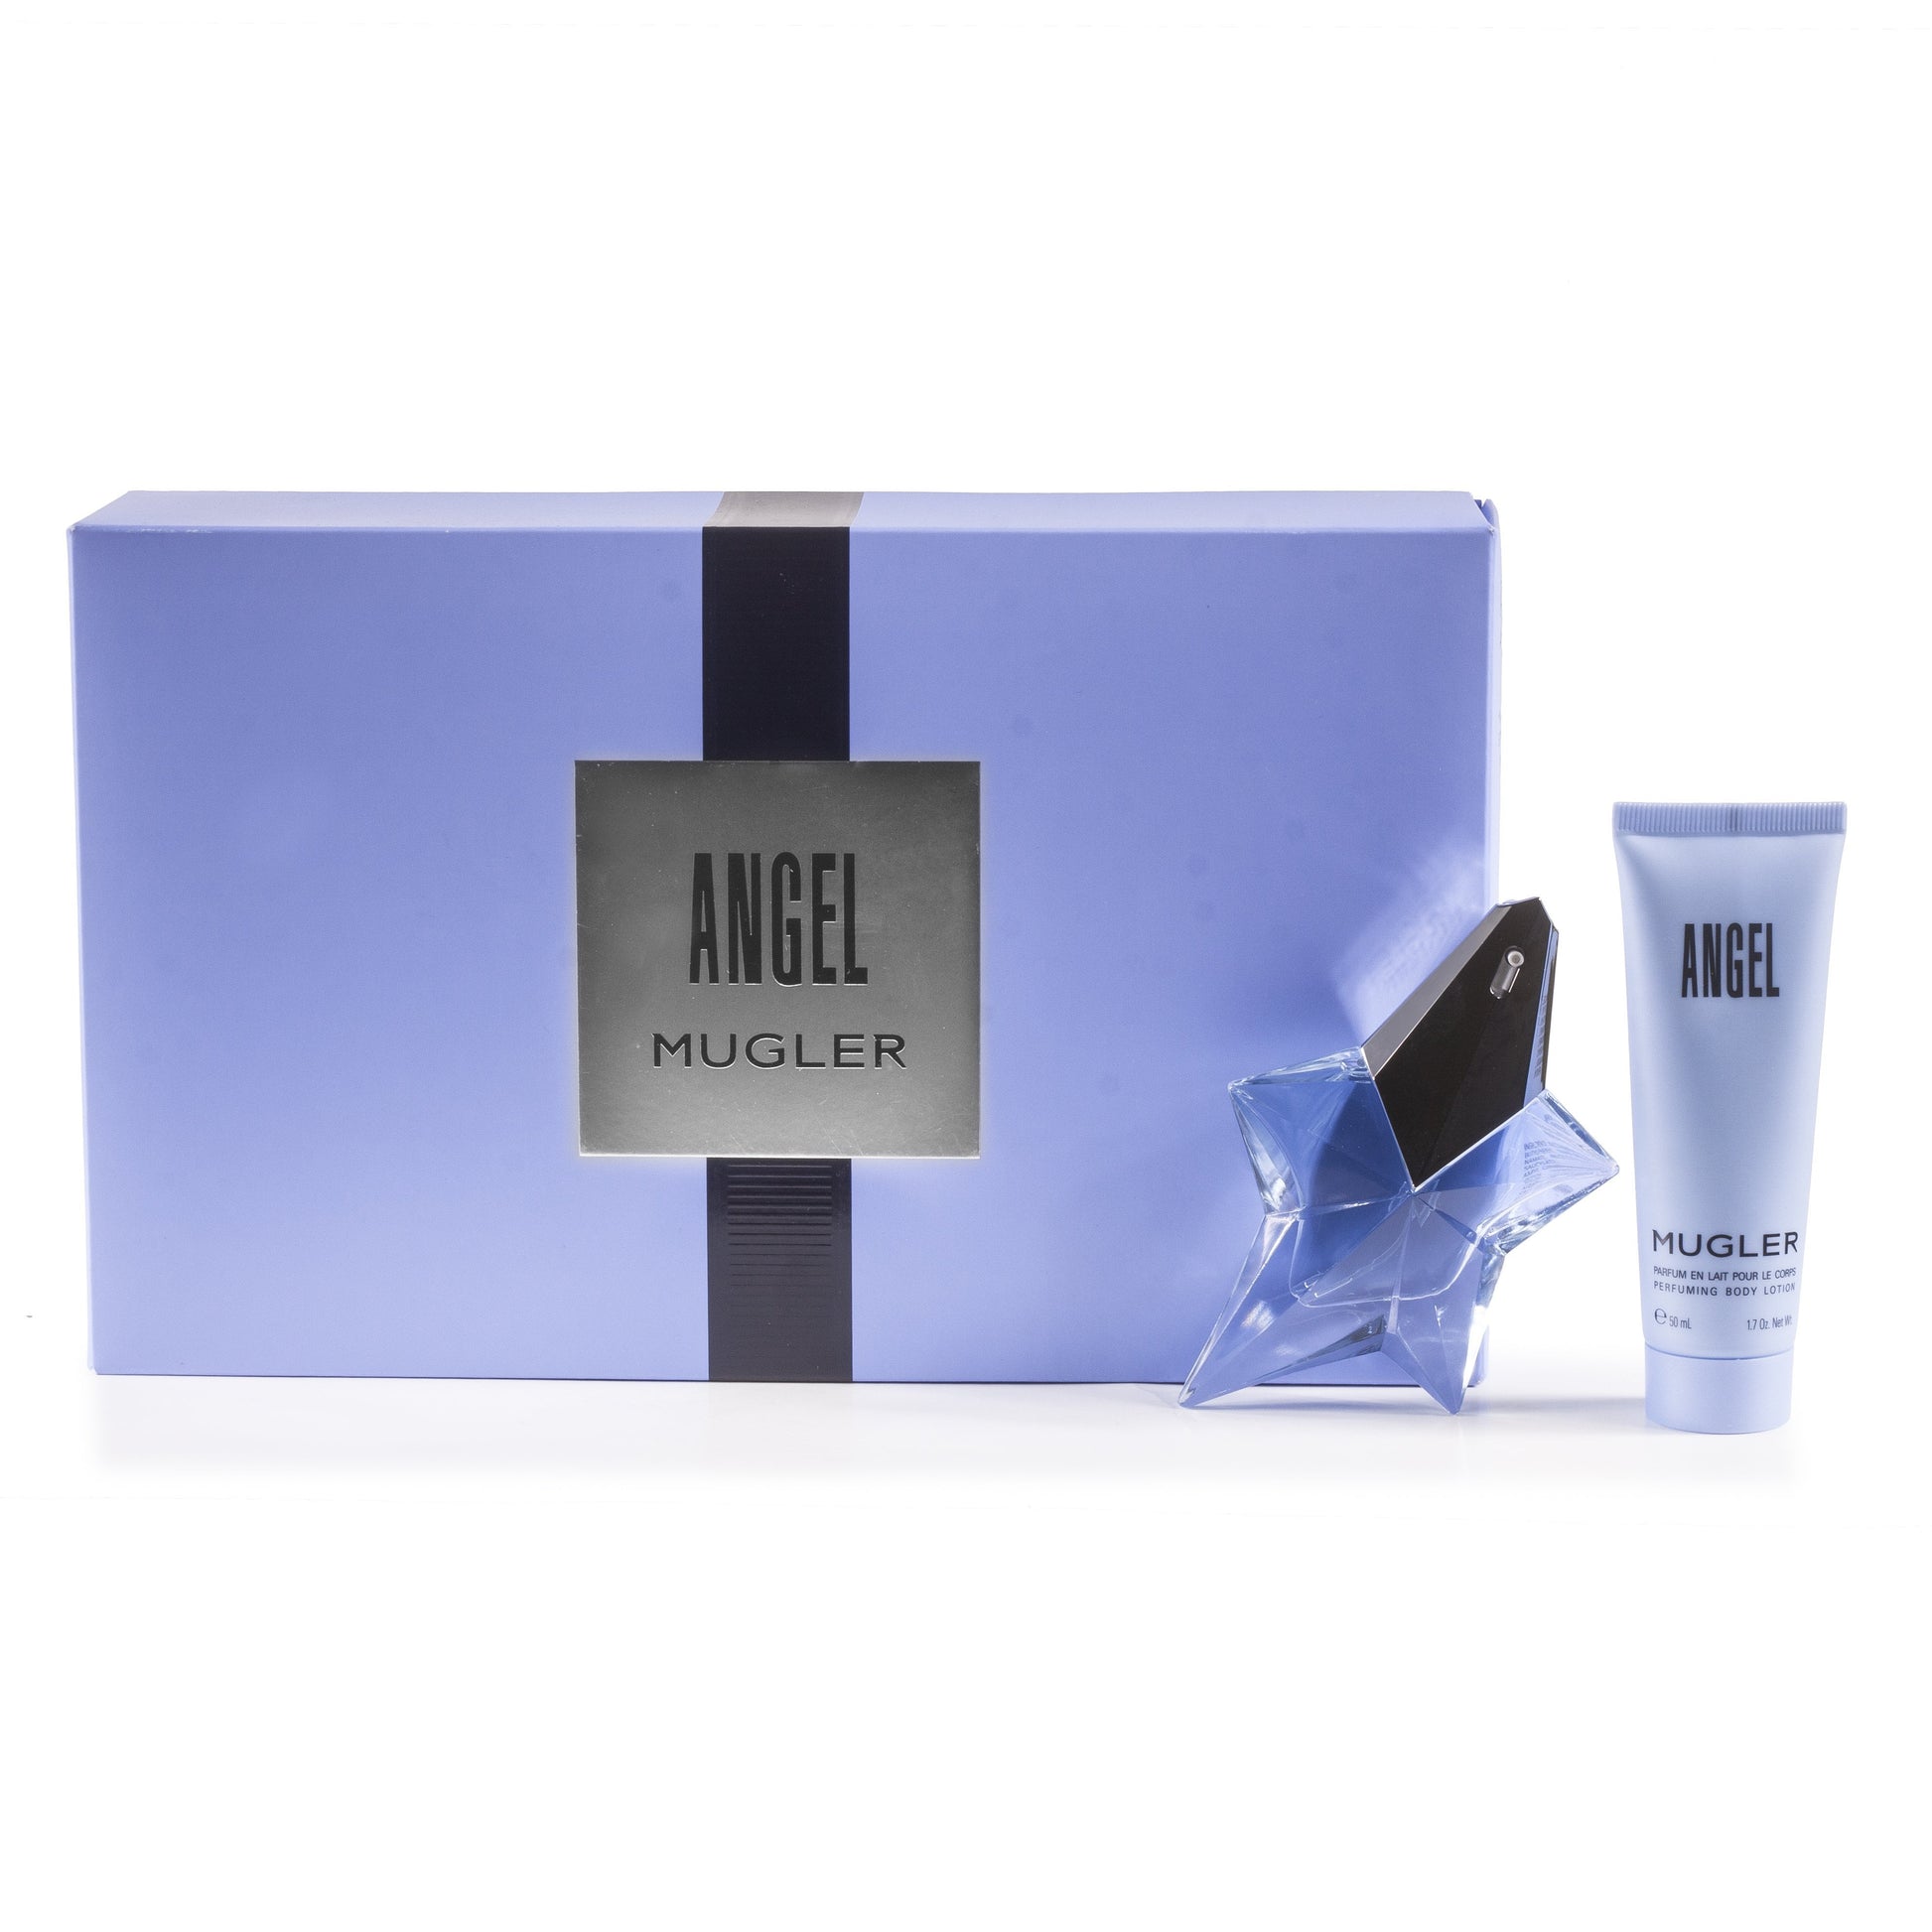 Angel Gift Set for Women by Thierry Mugler, Product image 1